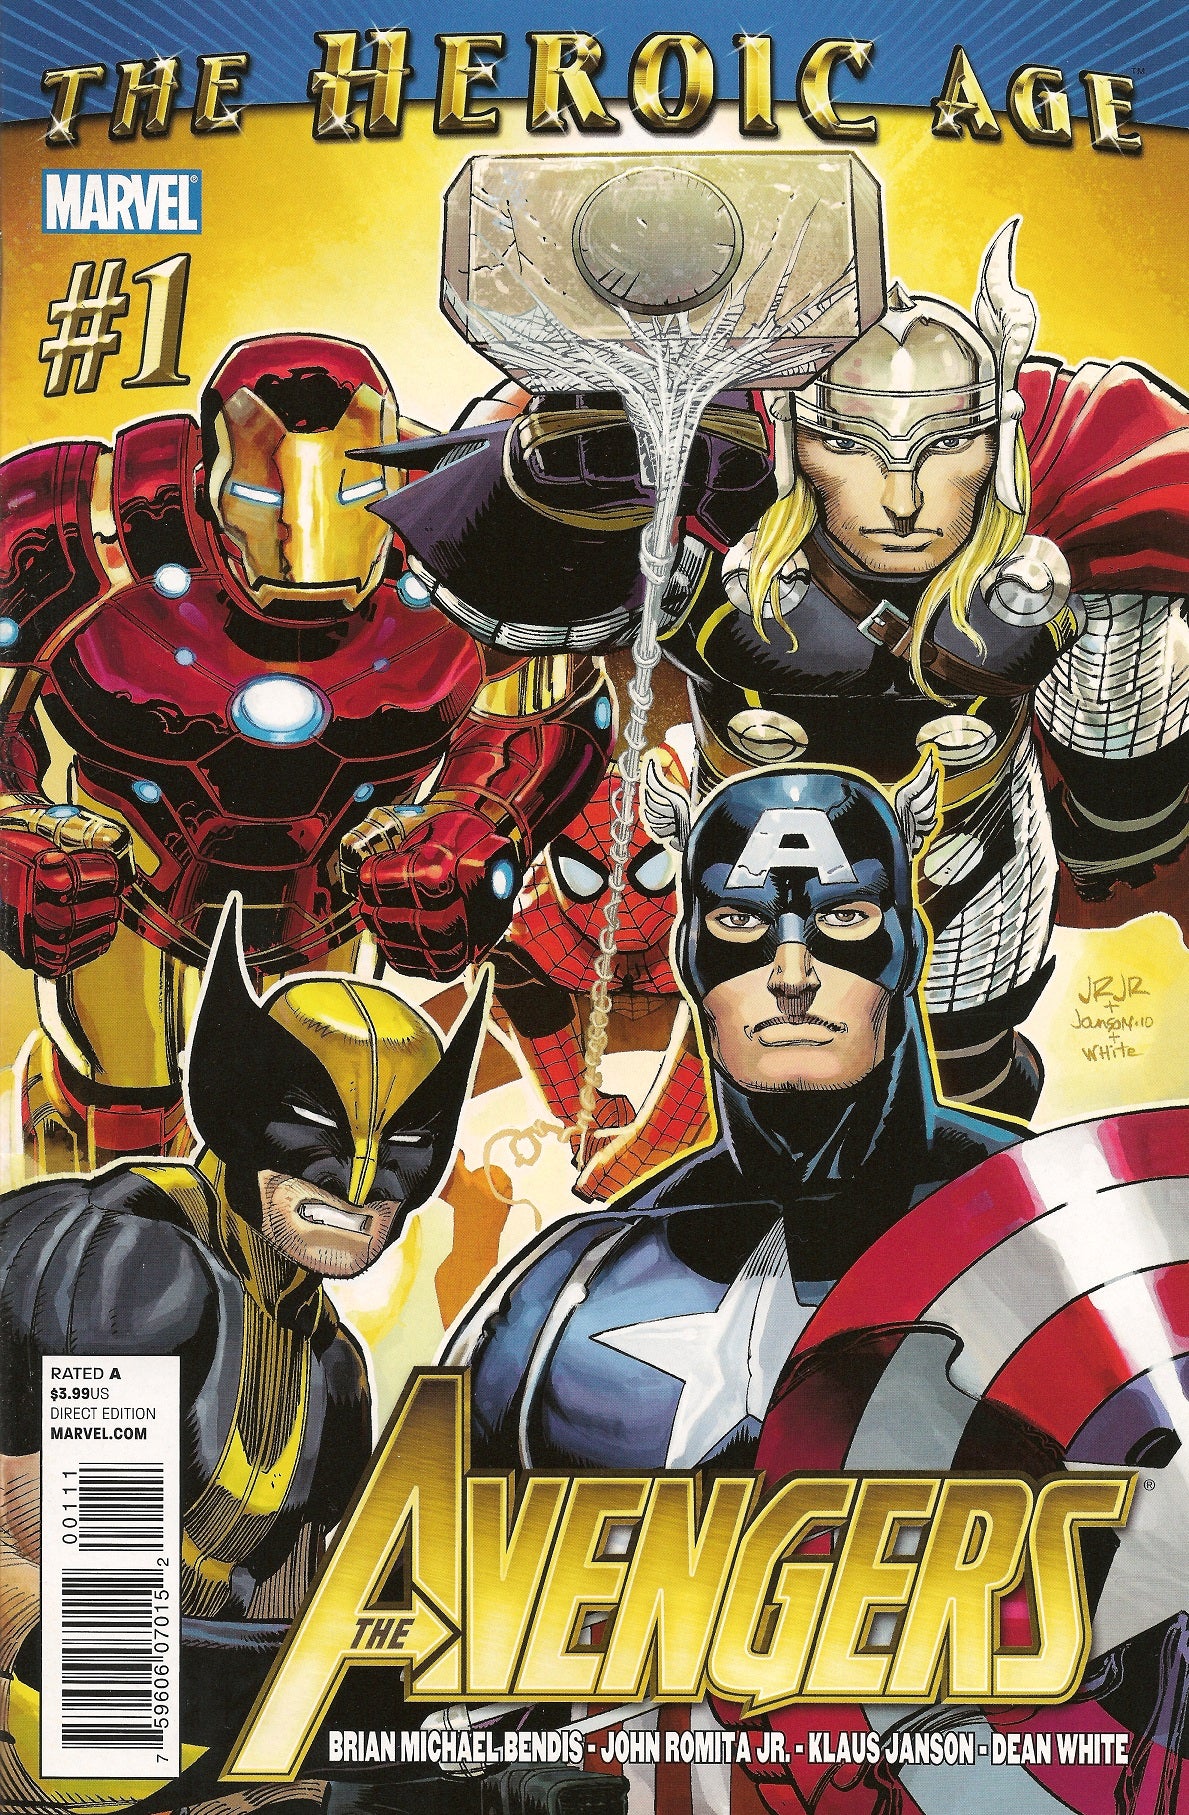 The Avengers: The Heroic Age #1